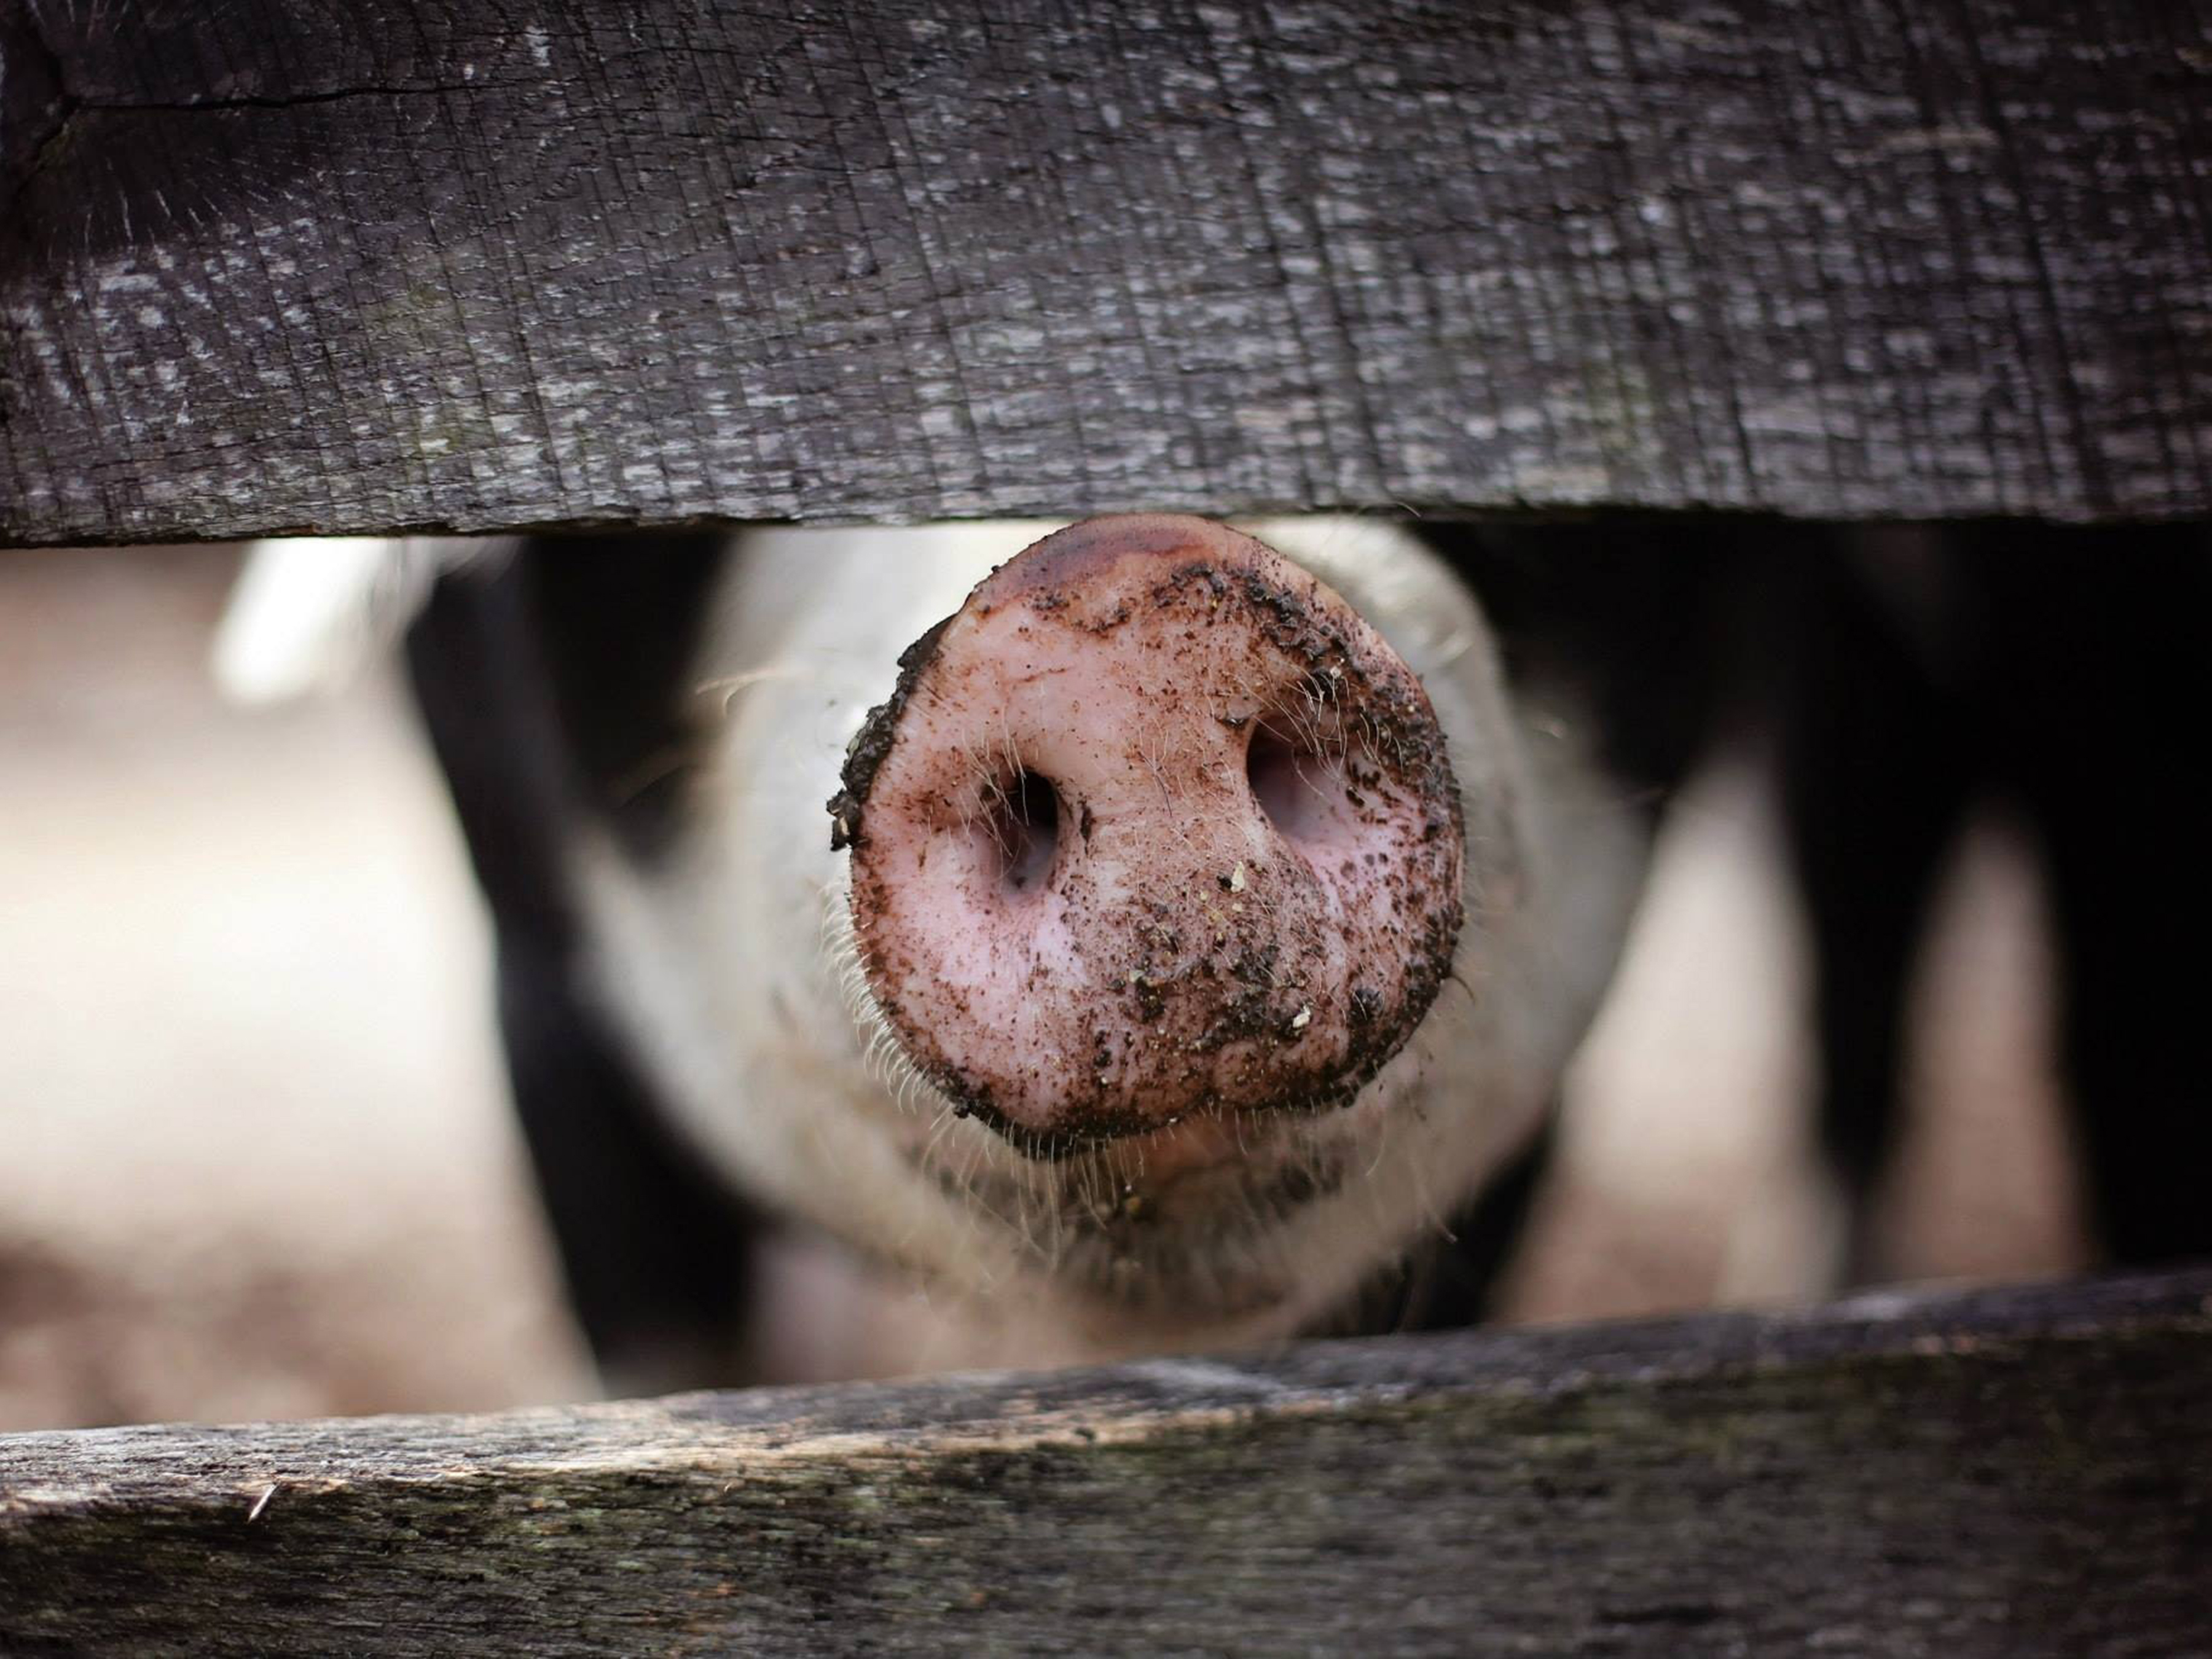 Thousands of Pigs Rot in Compost as U.S. Faces Meat Shortage